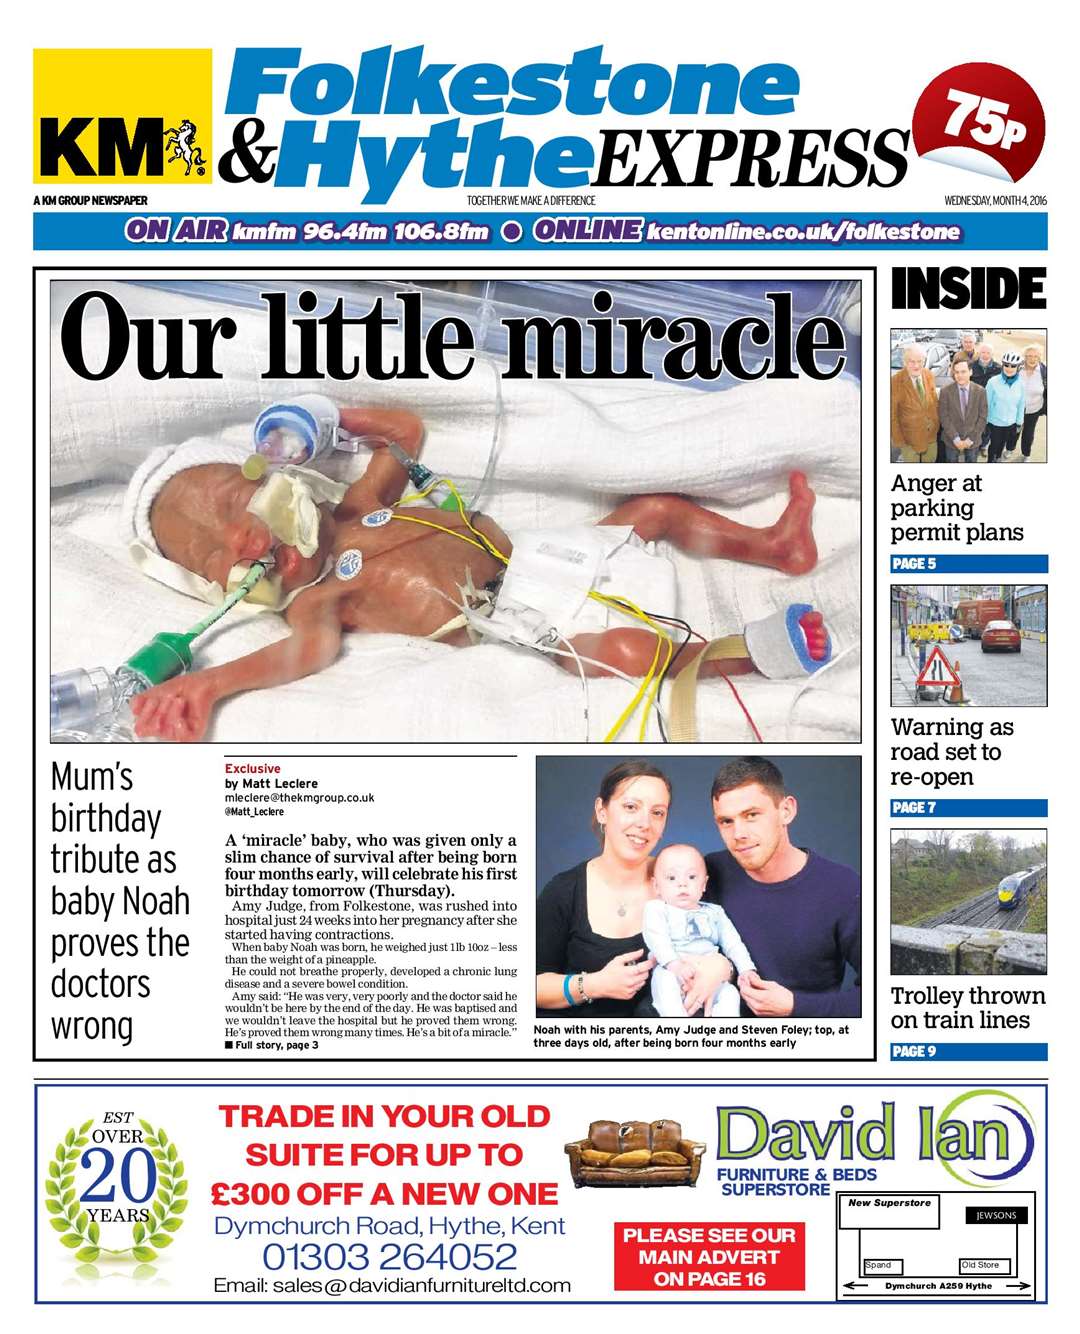 Folkestone and Hythe Express is published every Wednesday